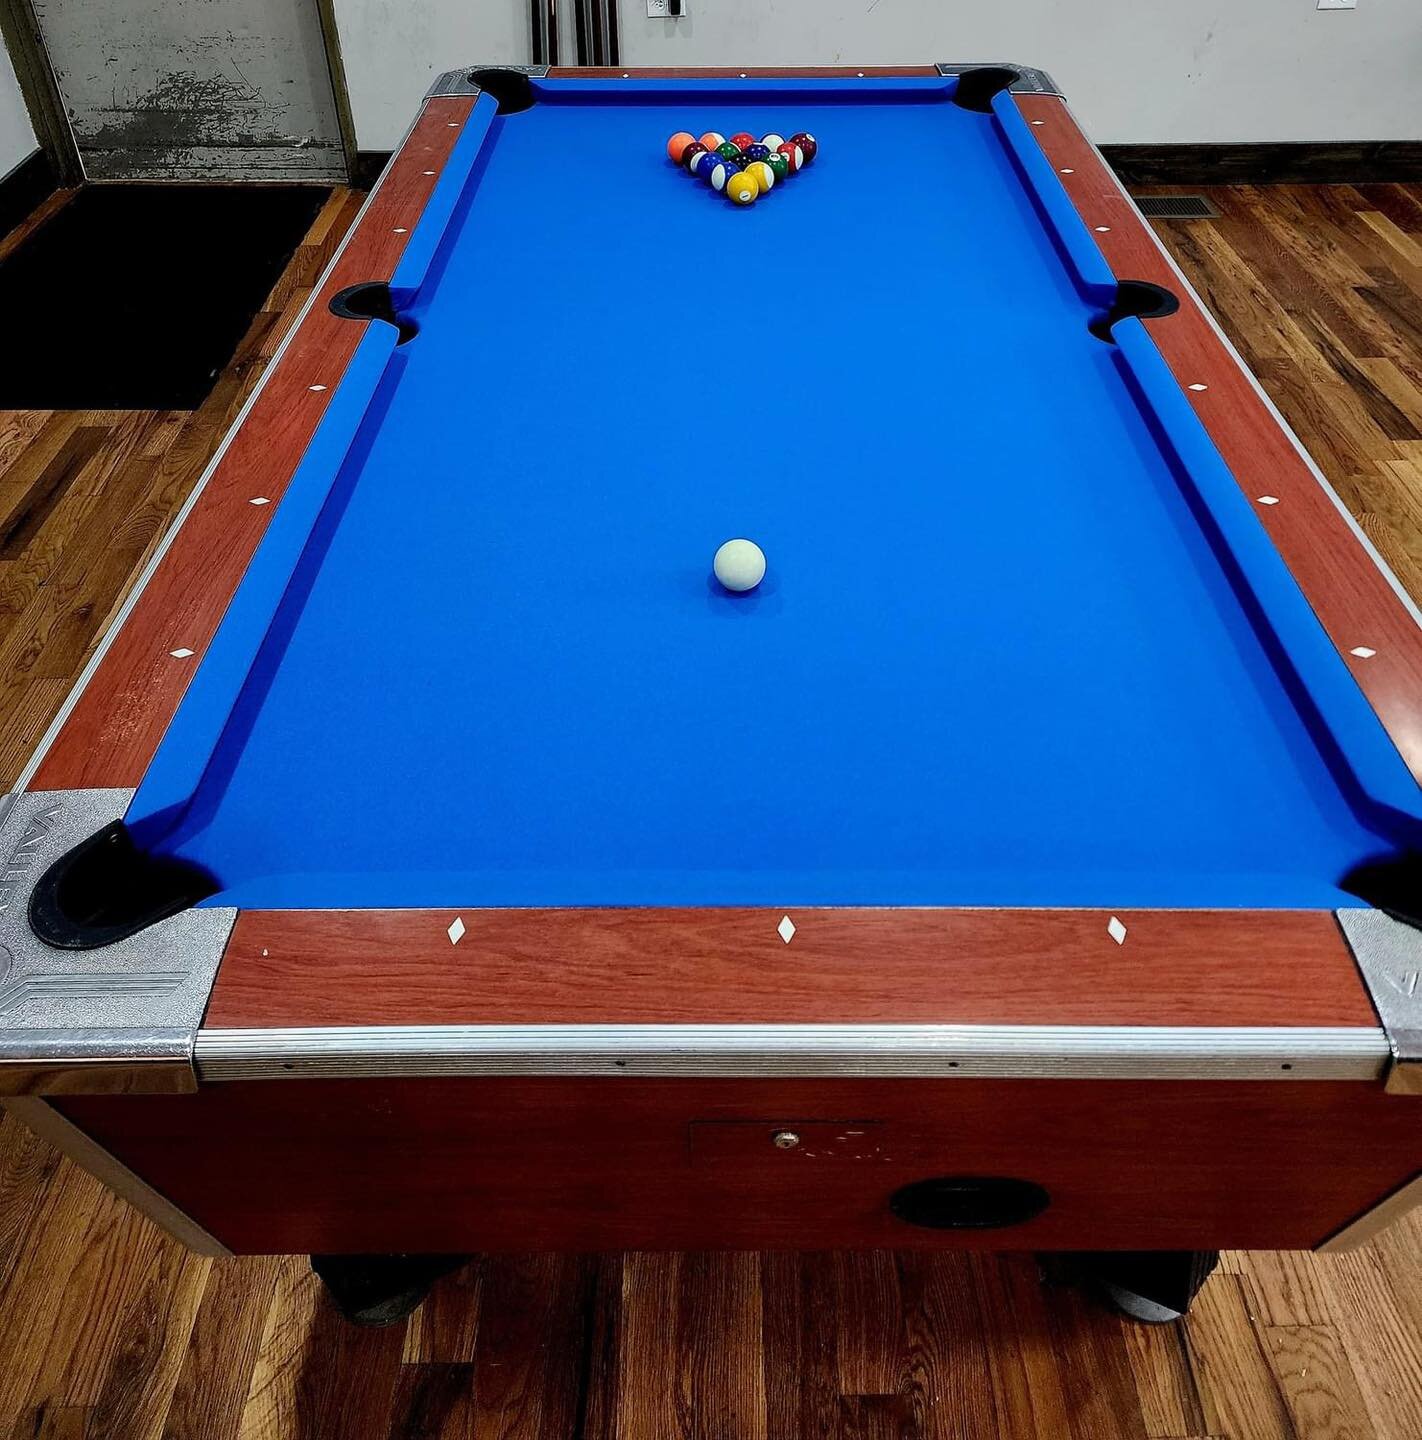 You asked - you got it! 
A NeW POOL TABLE!